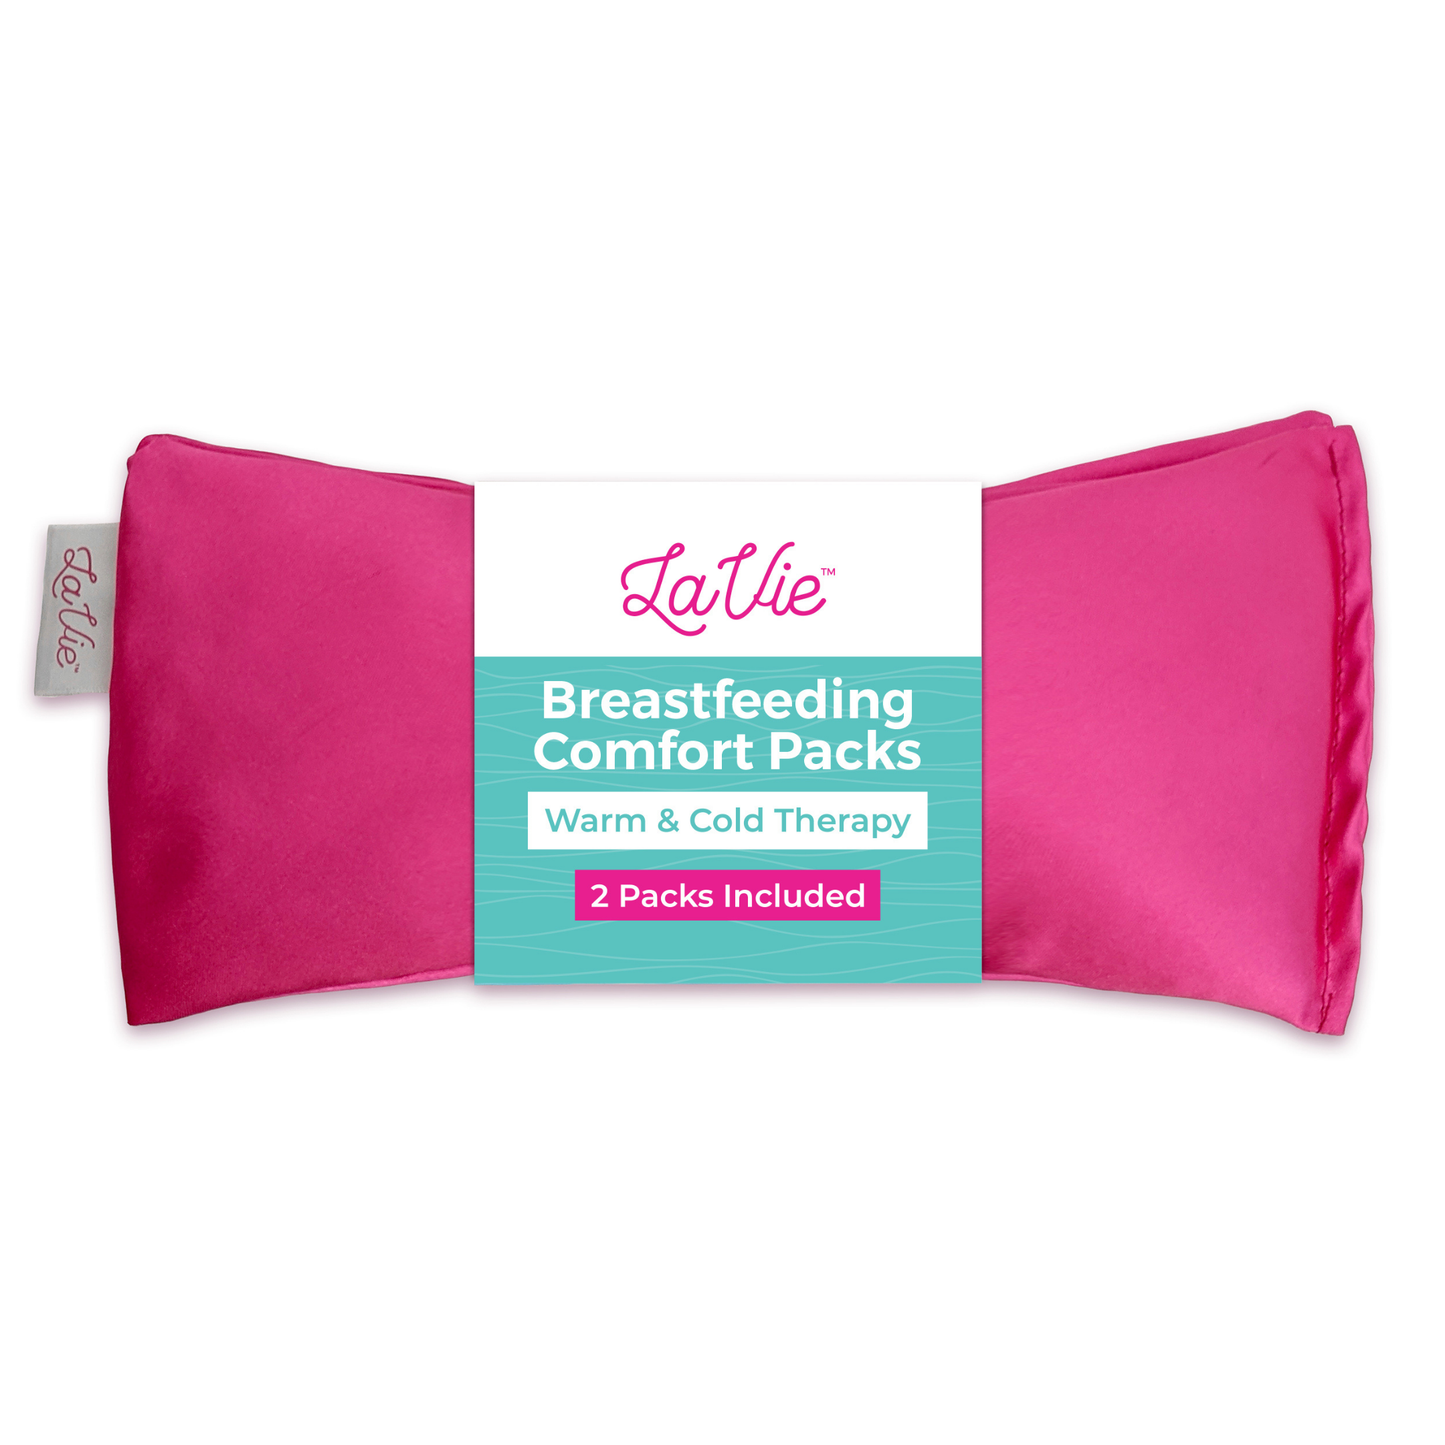 Breastfeeding Comfort Packs, Warm/Cold Therapy (2 packs)